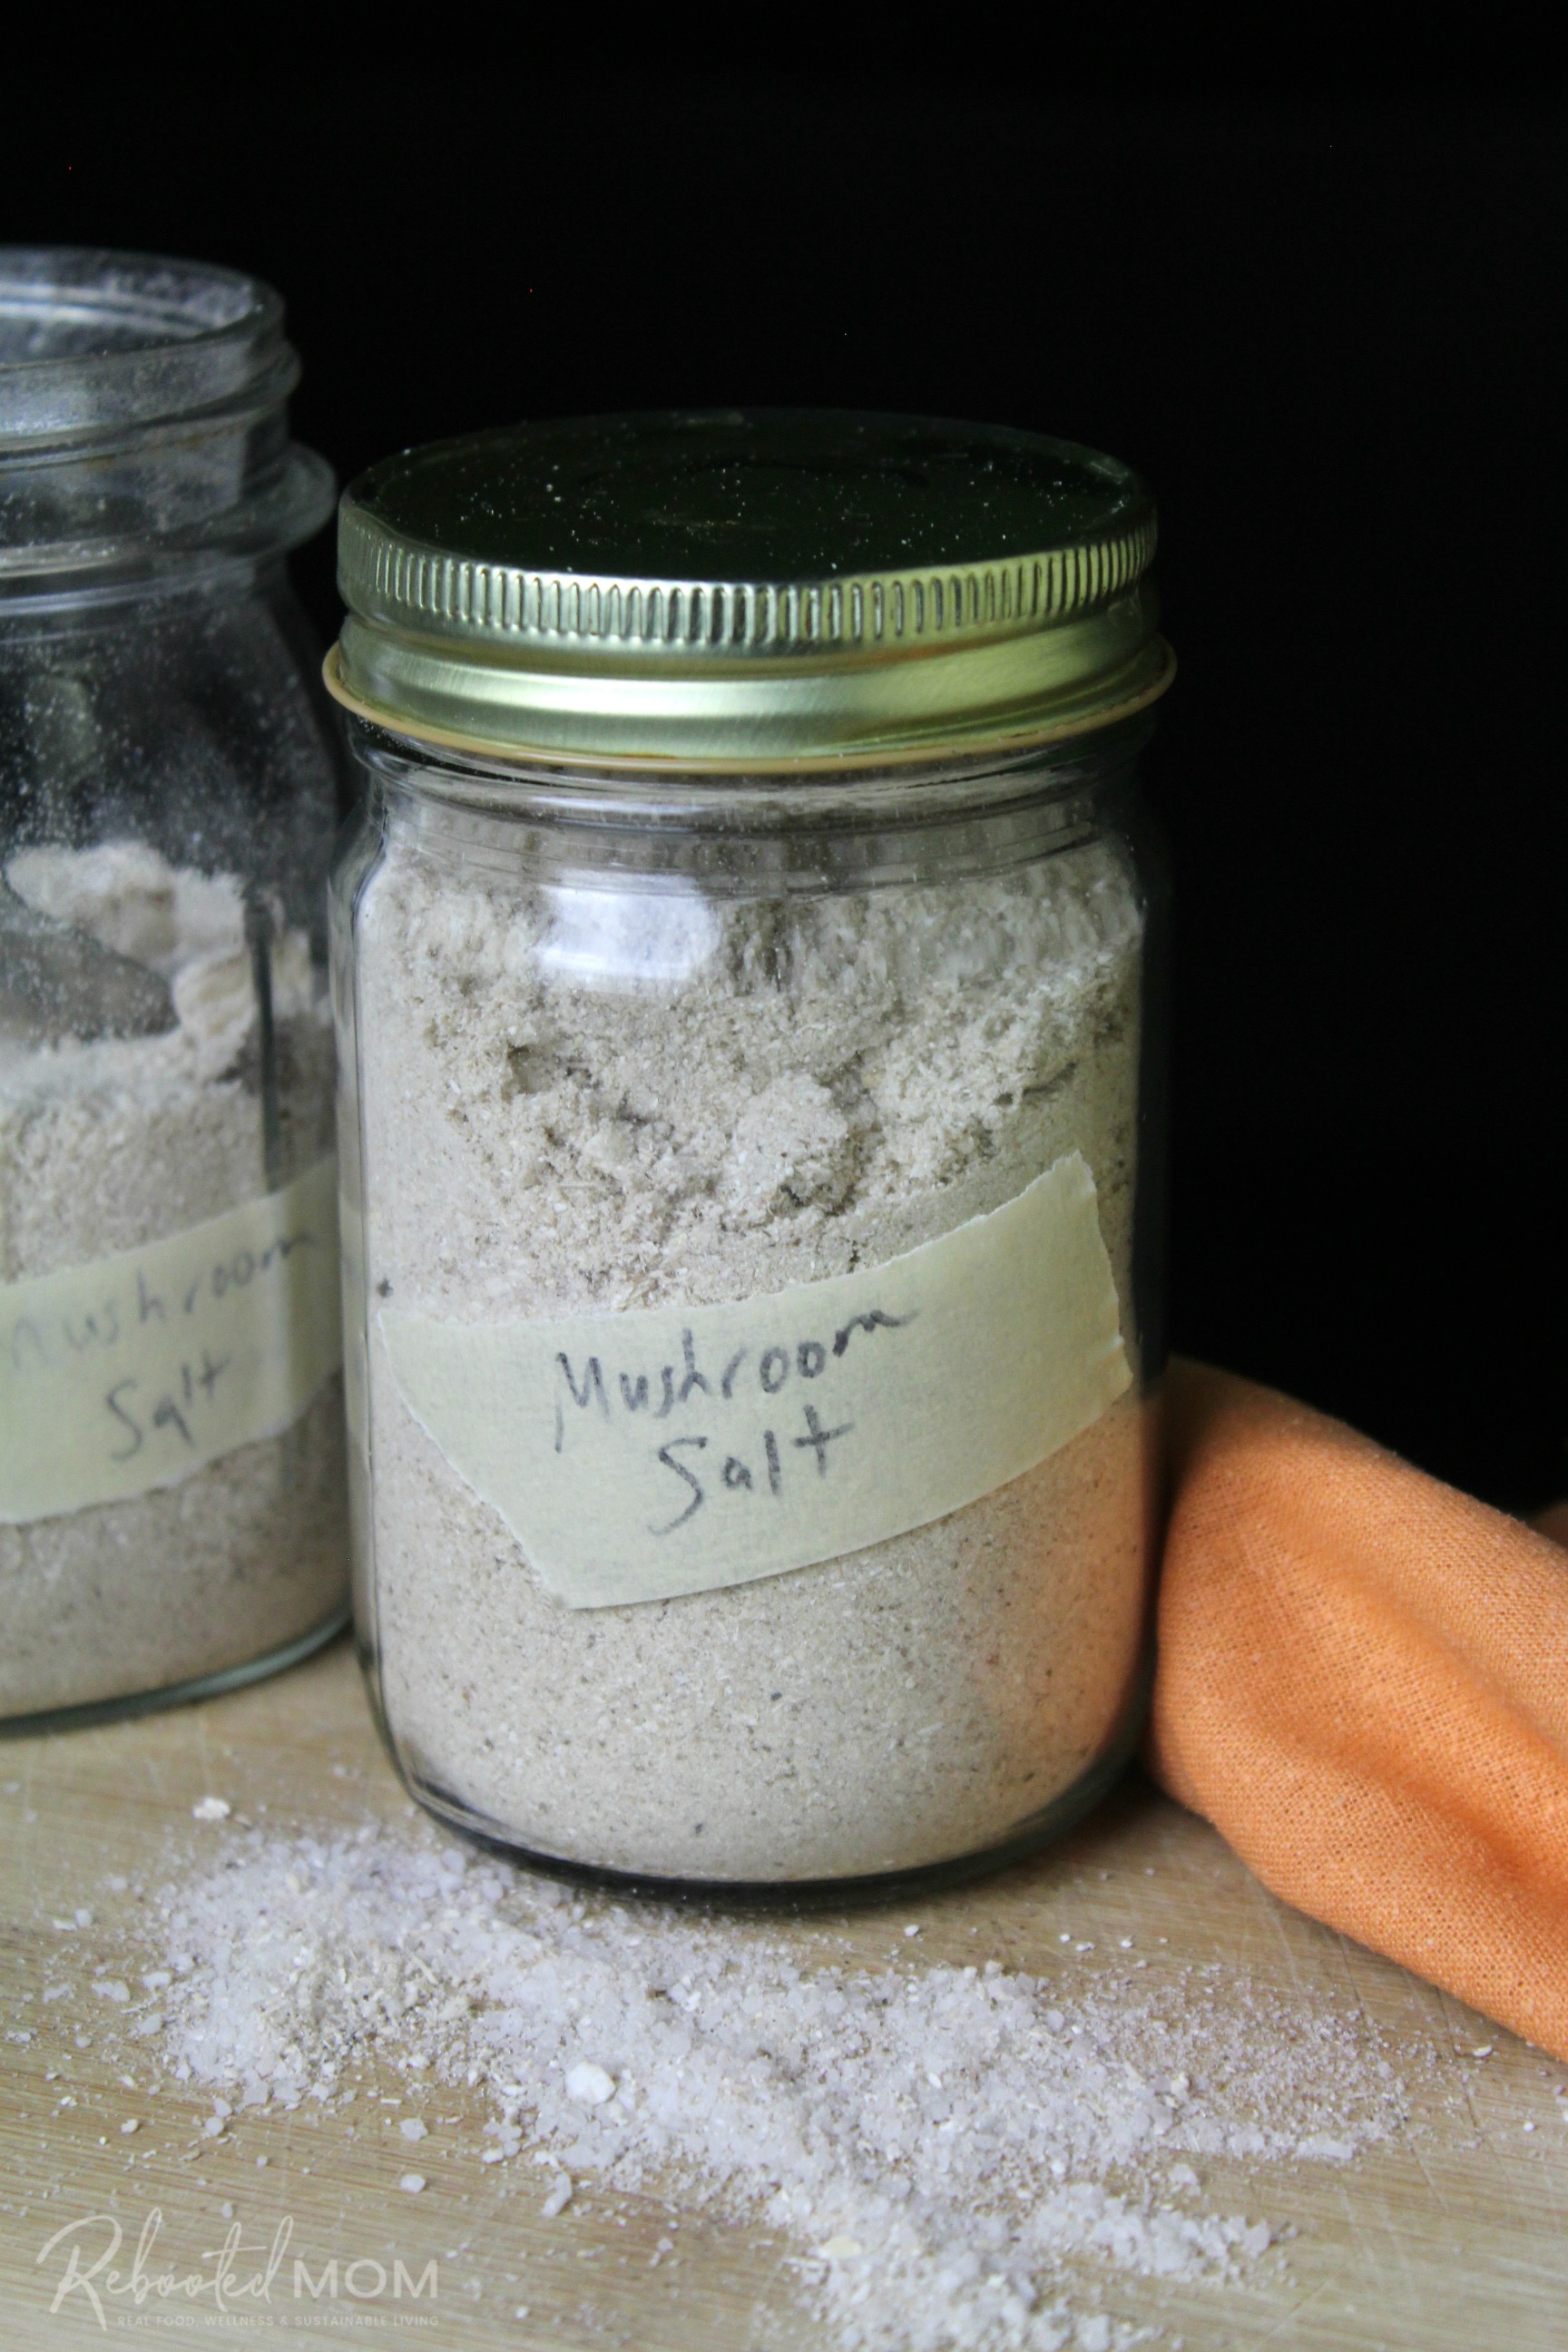 This homemade mushroom salt is simple to make and delicious on everything from roasted veggies to steak, chicken and so much more!